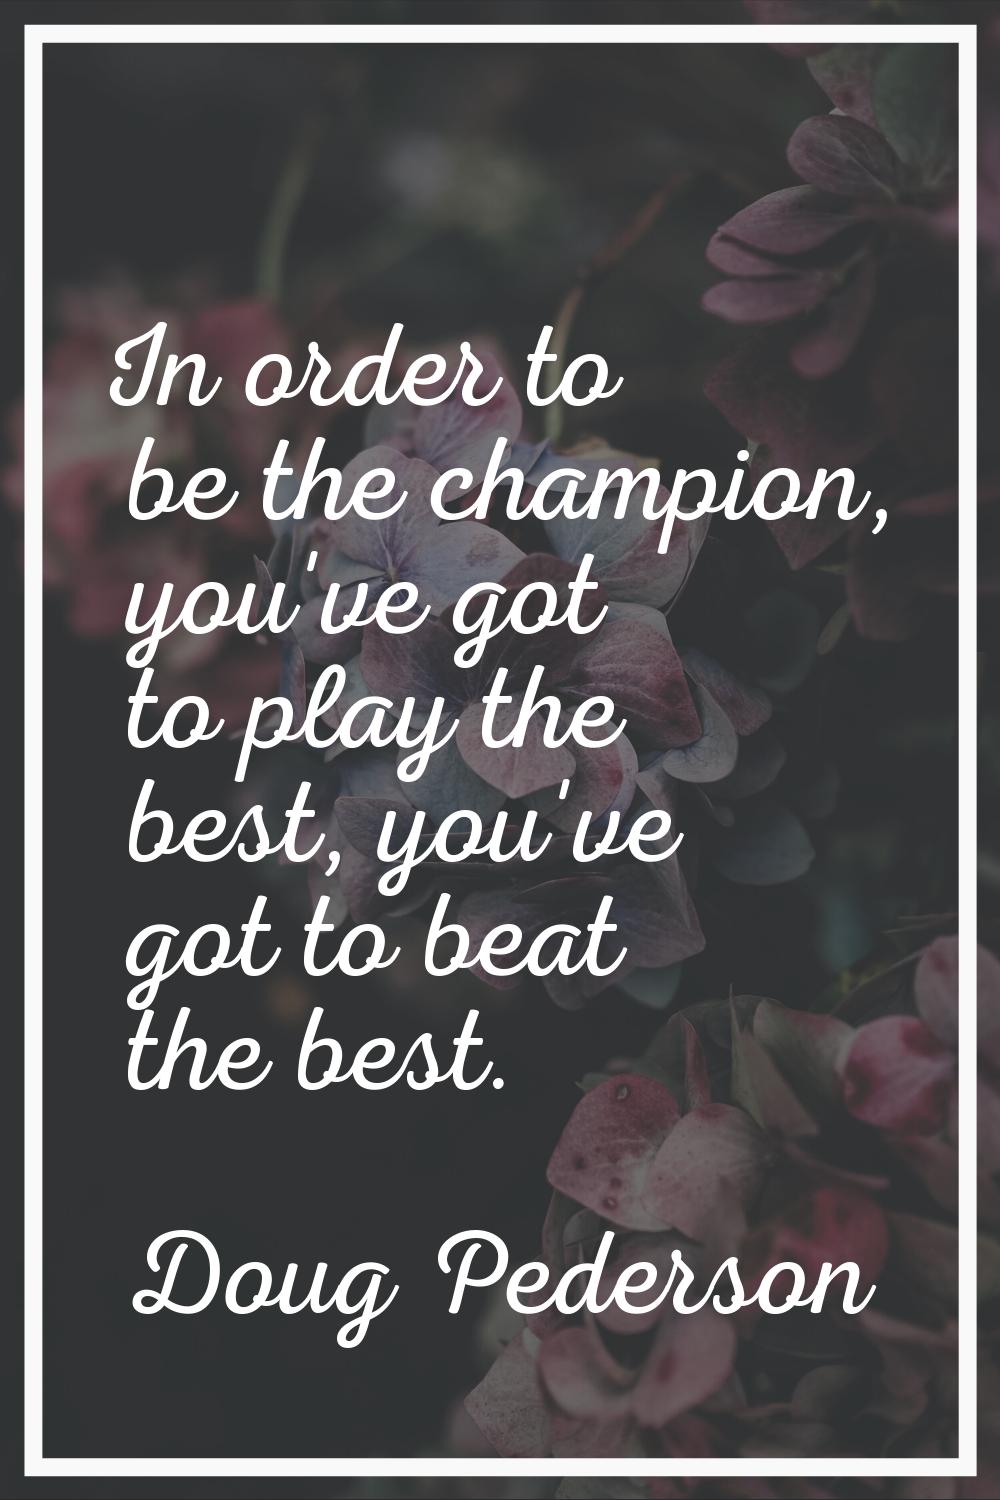 In order to be the champion, you've got to play the best, you've got to beat the best.